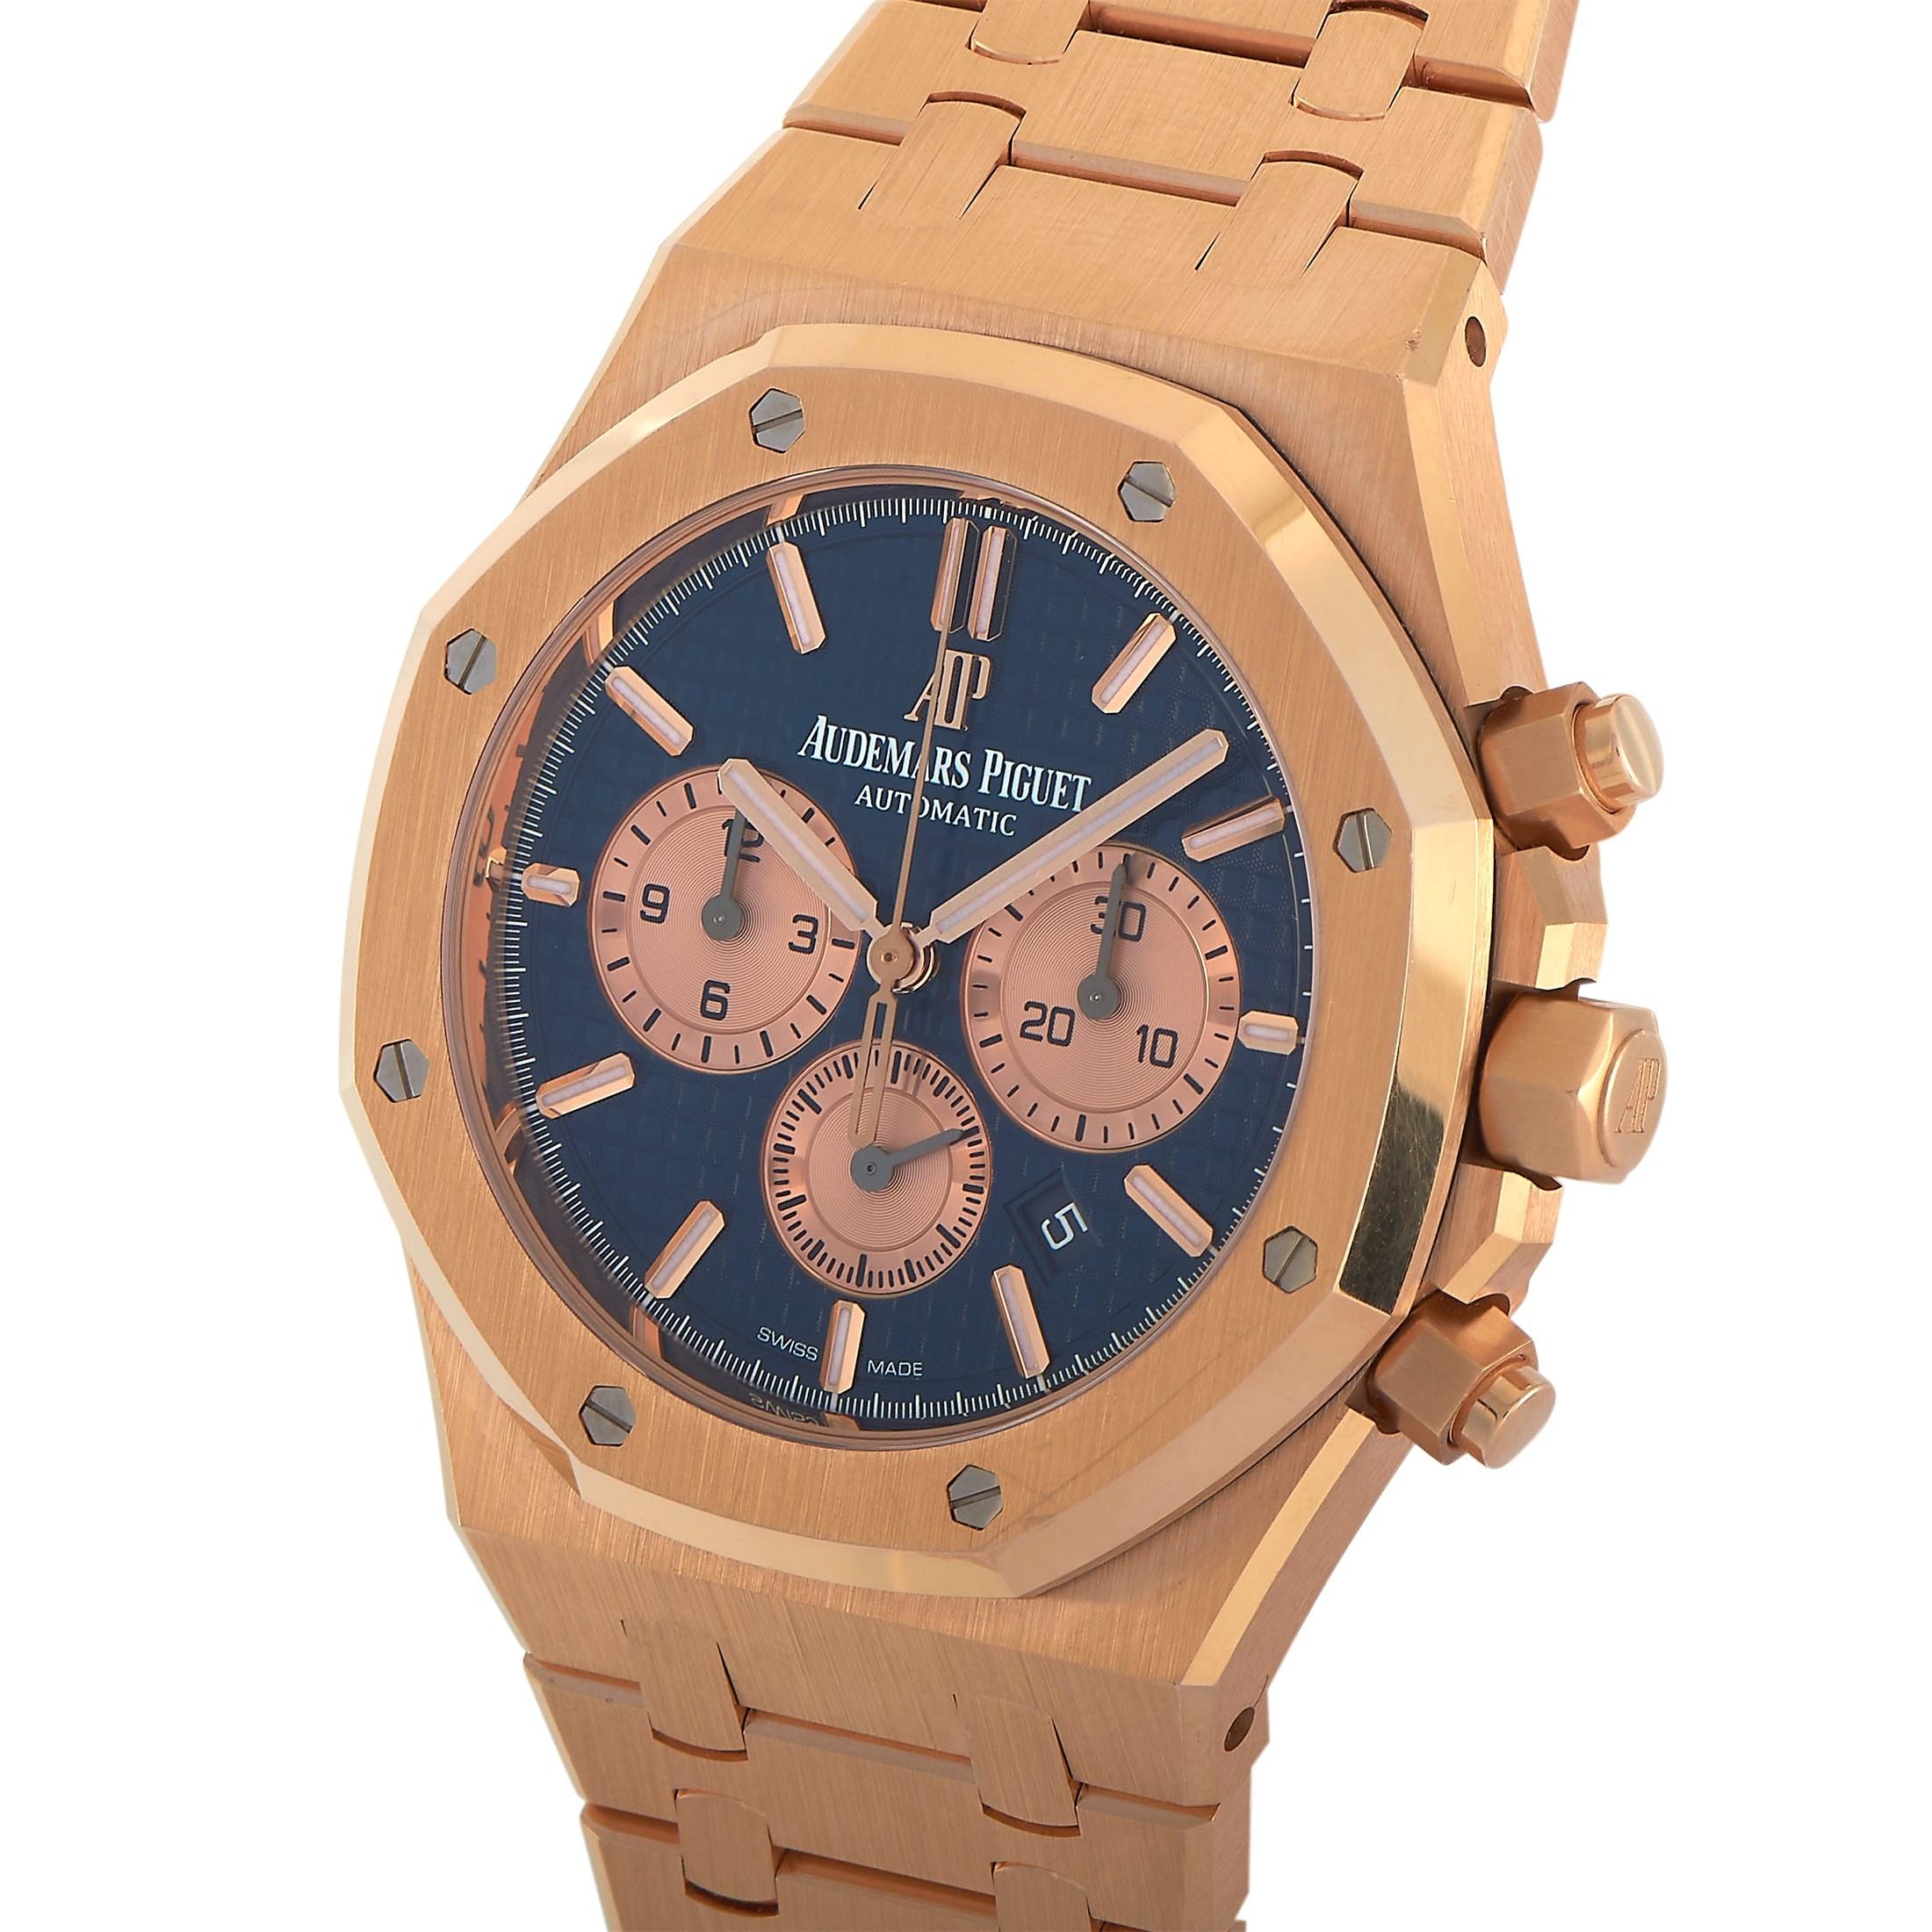 The Audemars Piguet Royal Oak Chronograph Watch, reference number 26331OR.OO.1220OR.01, is an opulent watch that exudes obvious luxury. 

This traditional timepiece includes a 41mm case, bezel, and bracelet crafted from radiant 18K Rose Gold. It